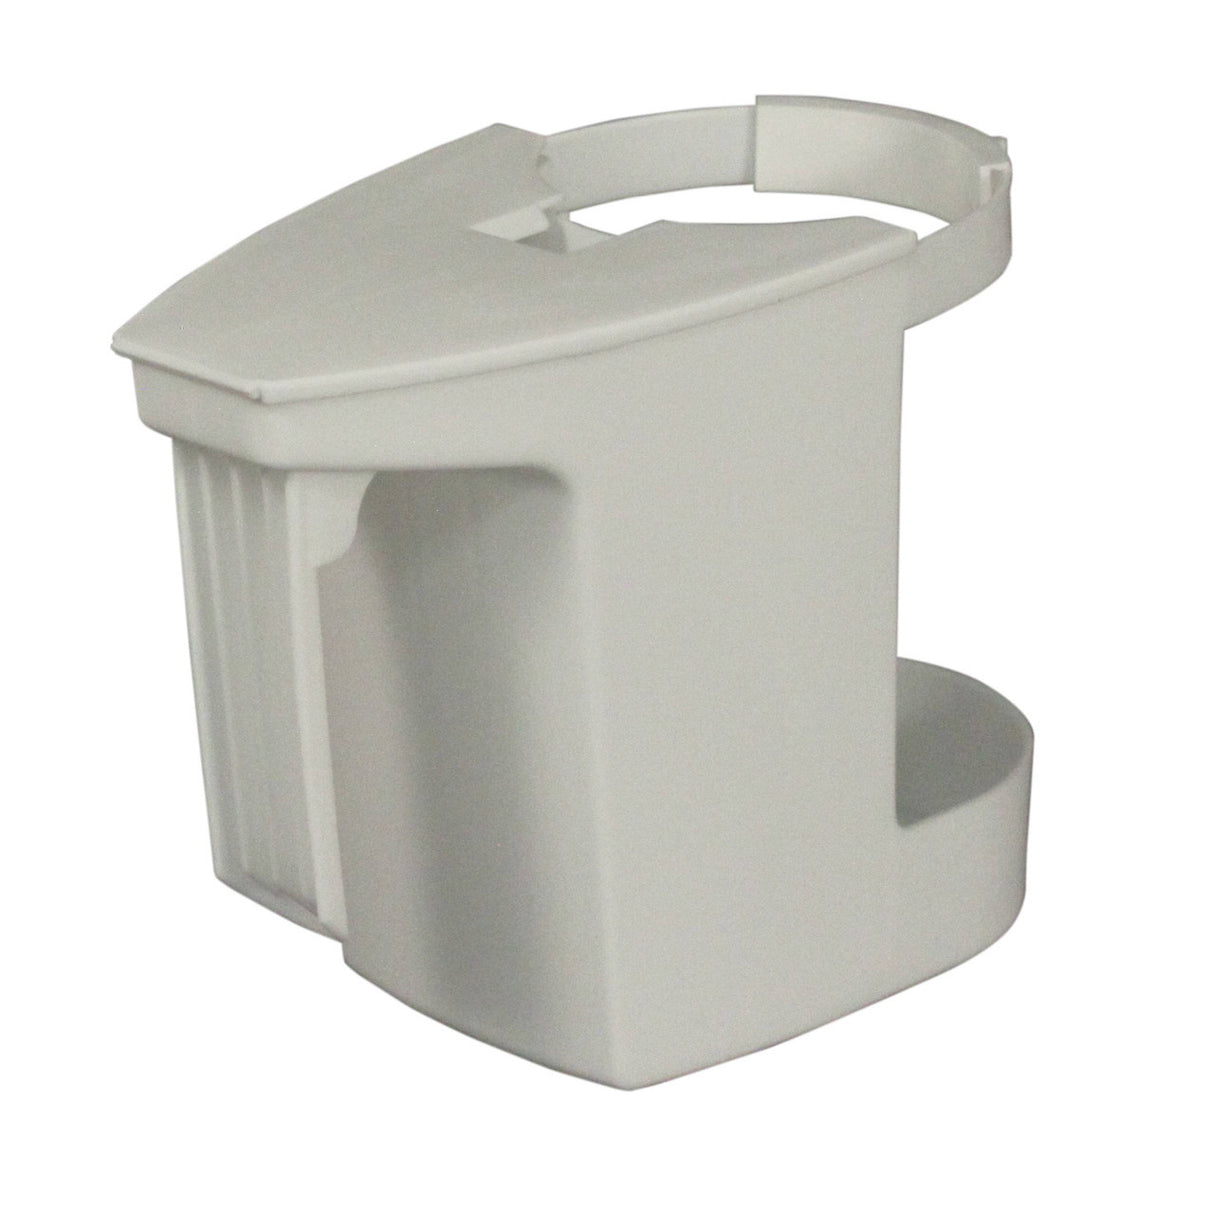 Impact Products Impact Toilet Bowl Caddie, White (Case of 12) 